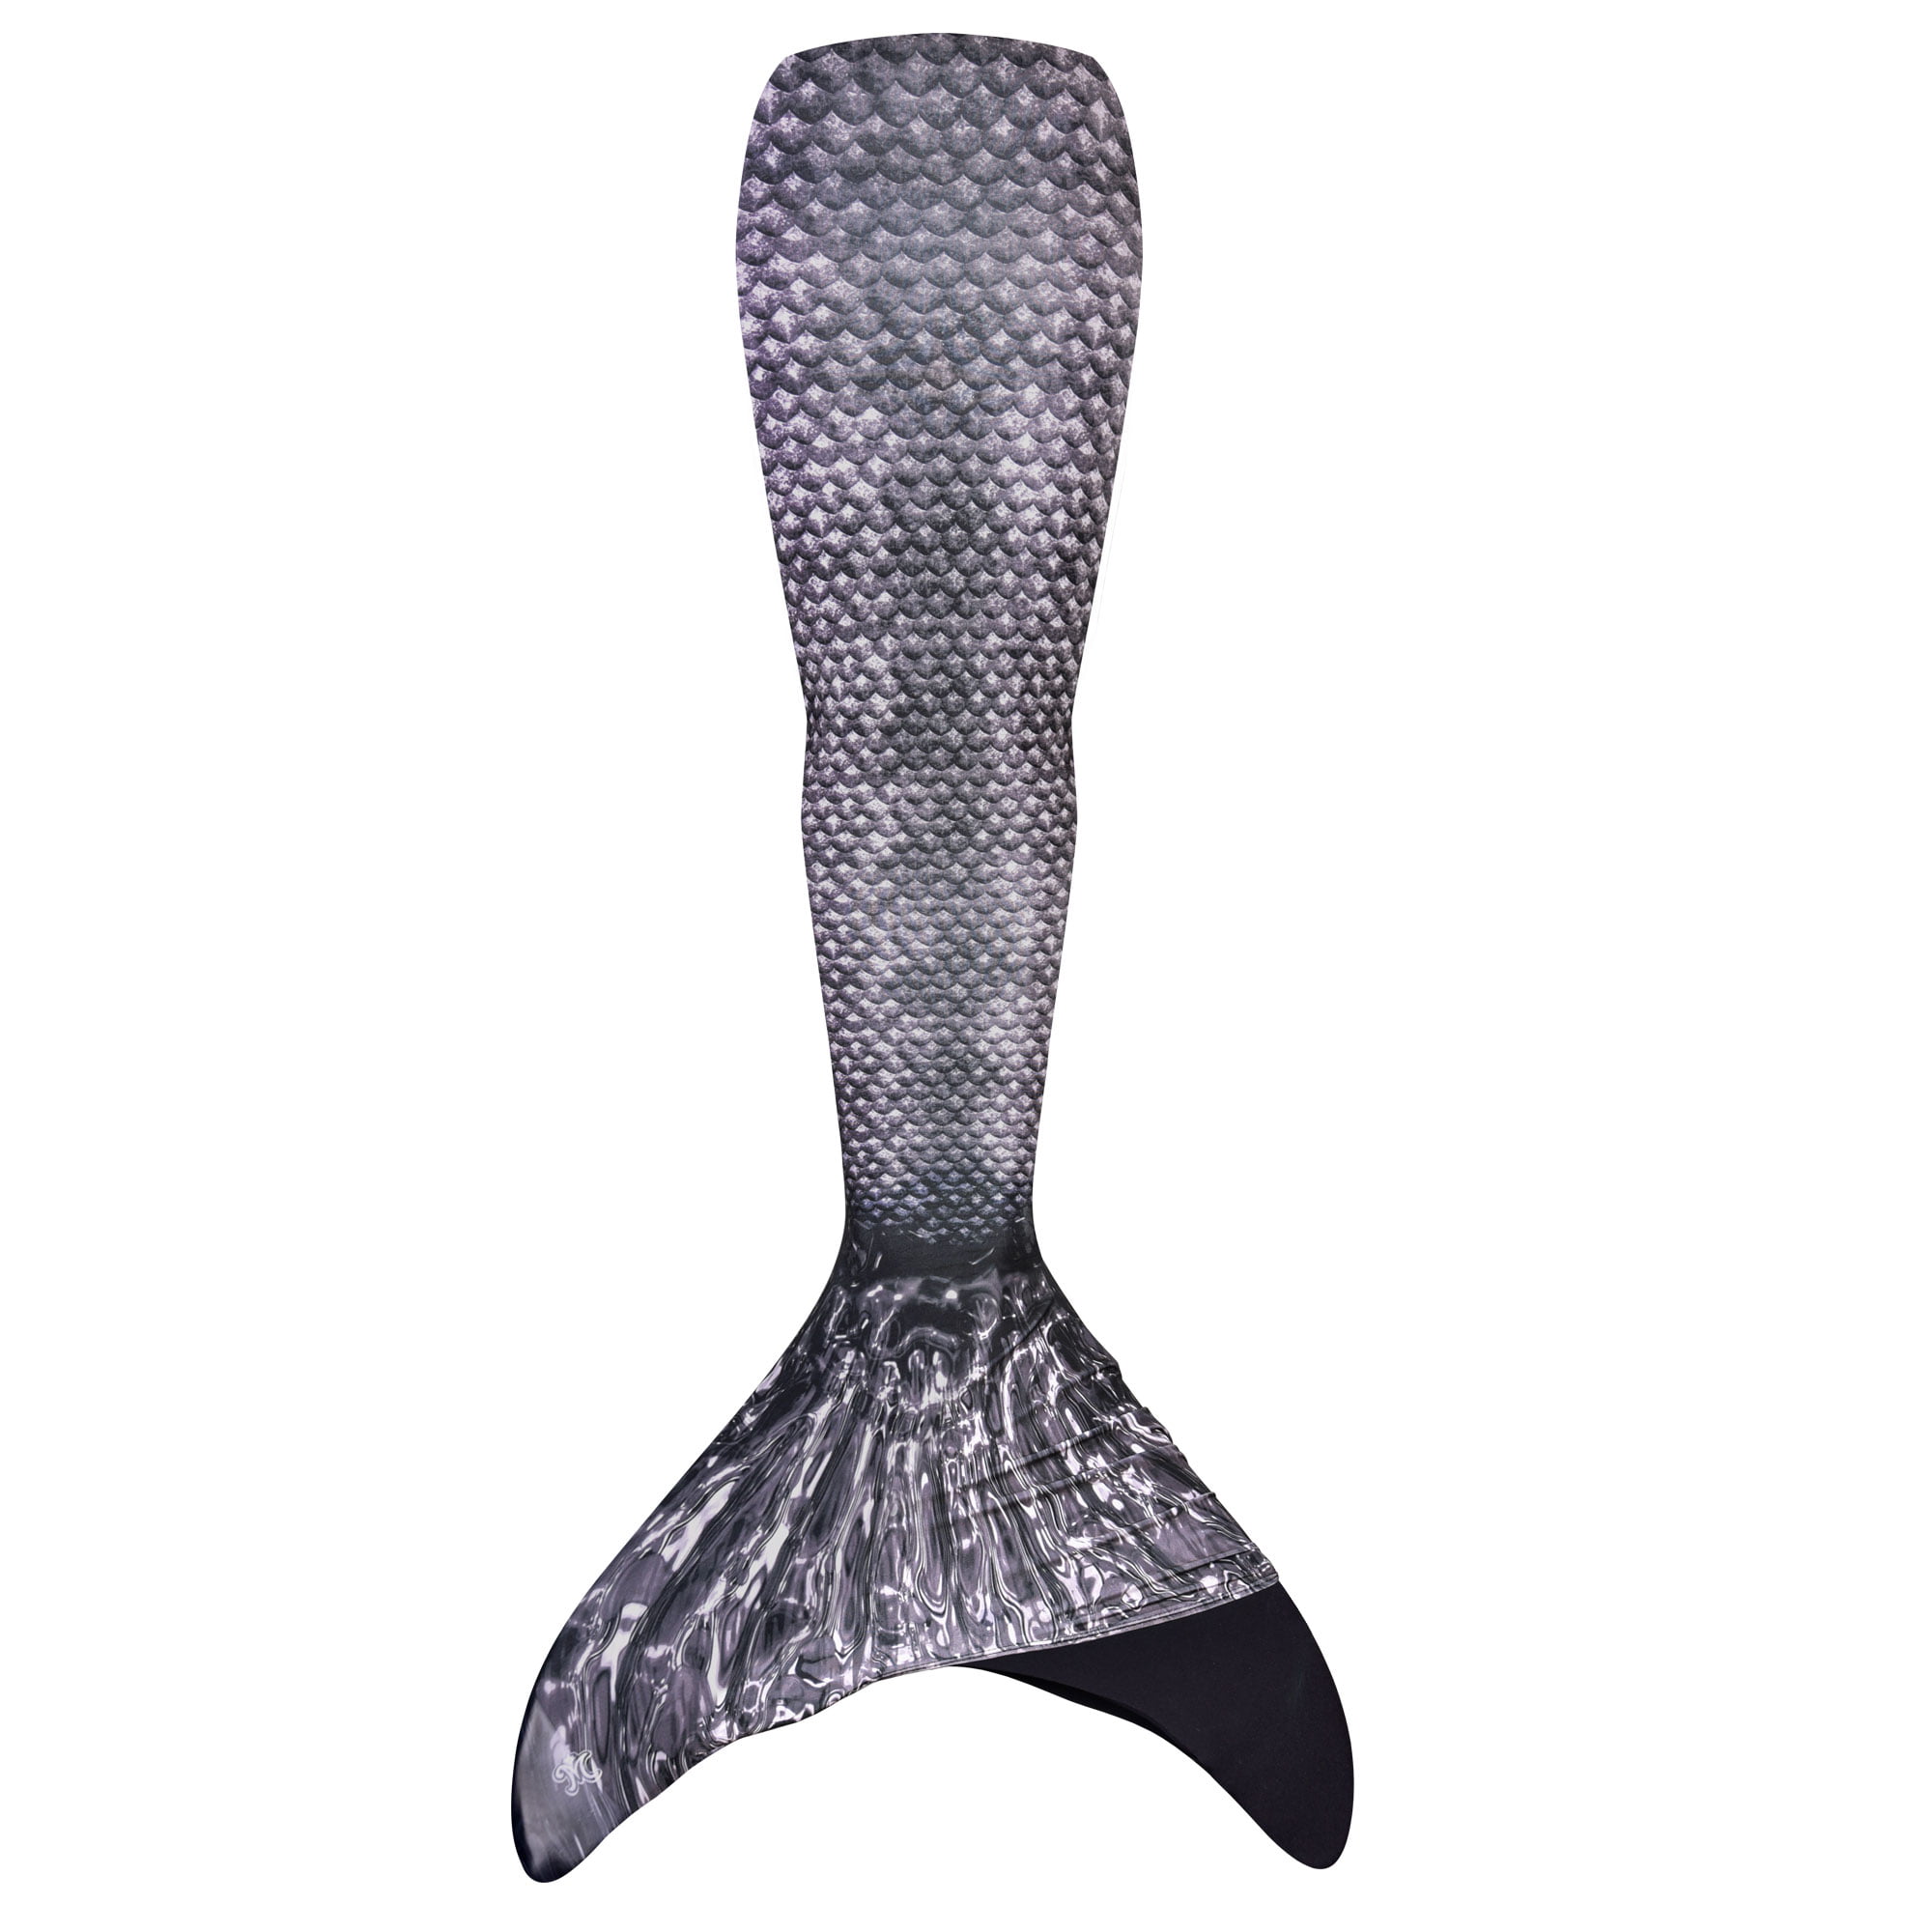 BE FINE Mermaid Tail with Monofin for Swimming,Mermaid Fins for Kids and Adults Black 